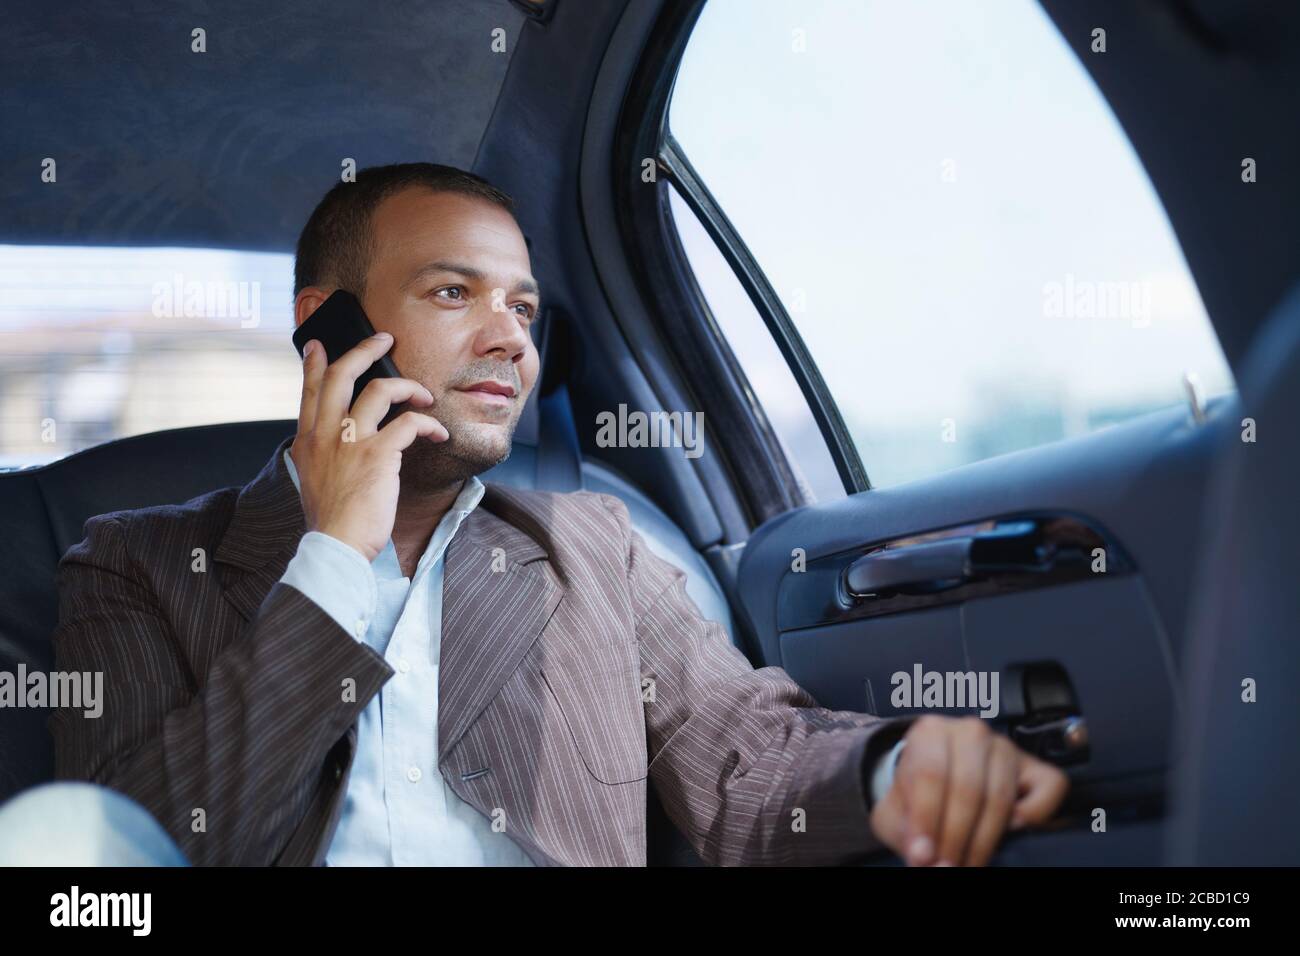 Businessman Talking On Mobile Phone Travelling In Limousine Stock Photo